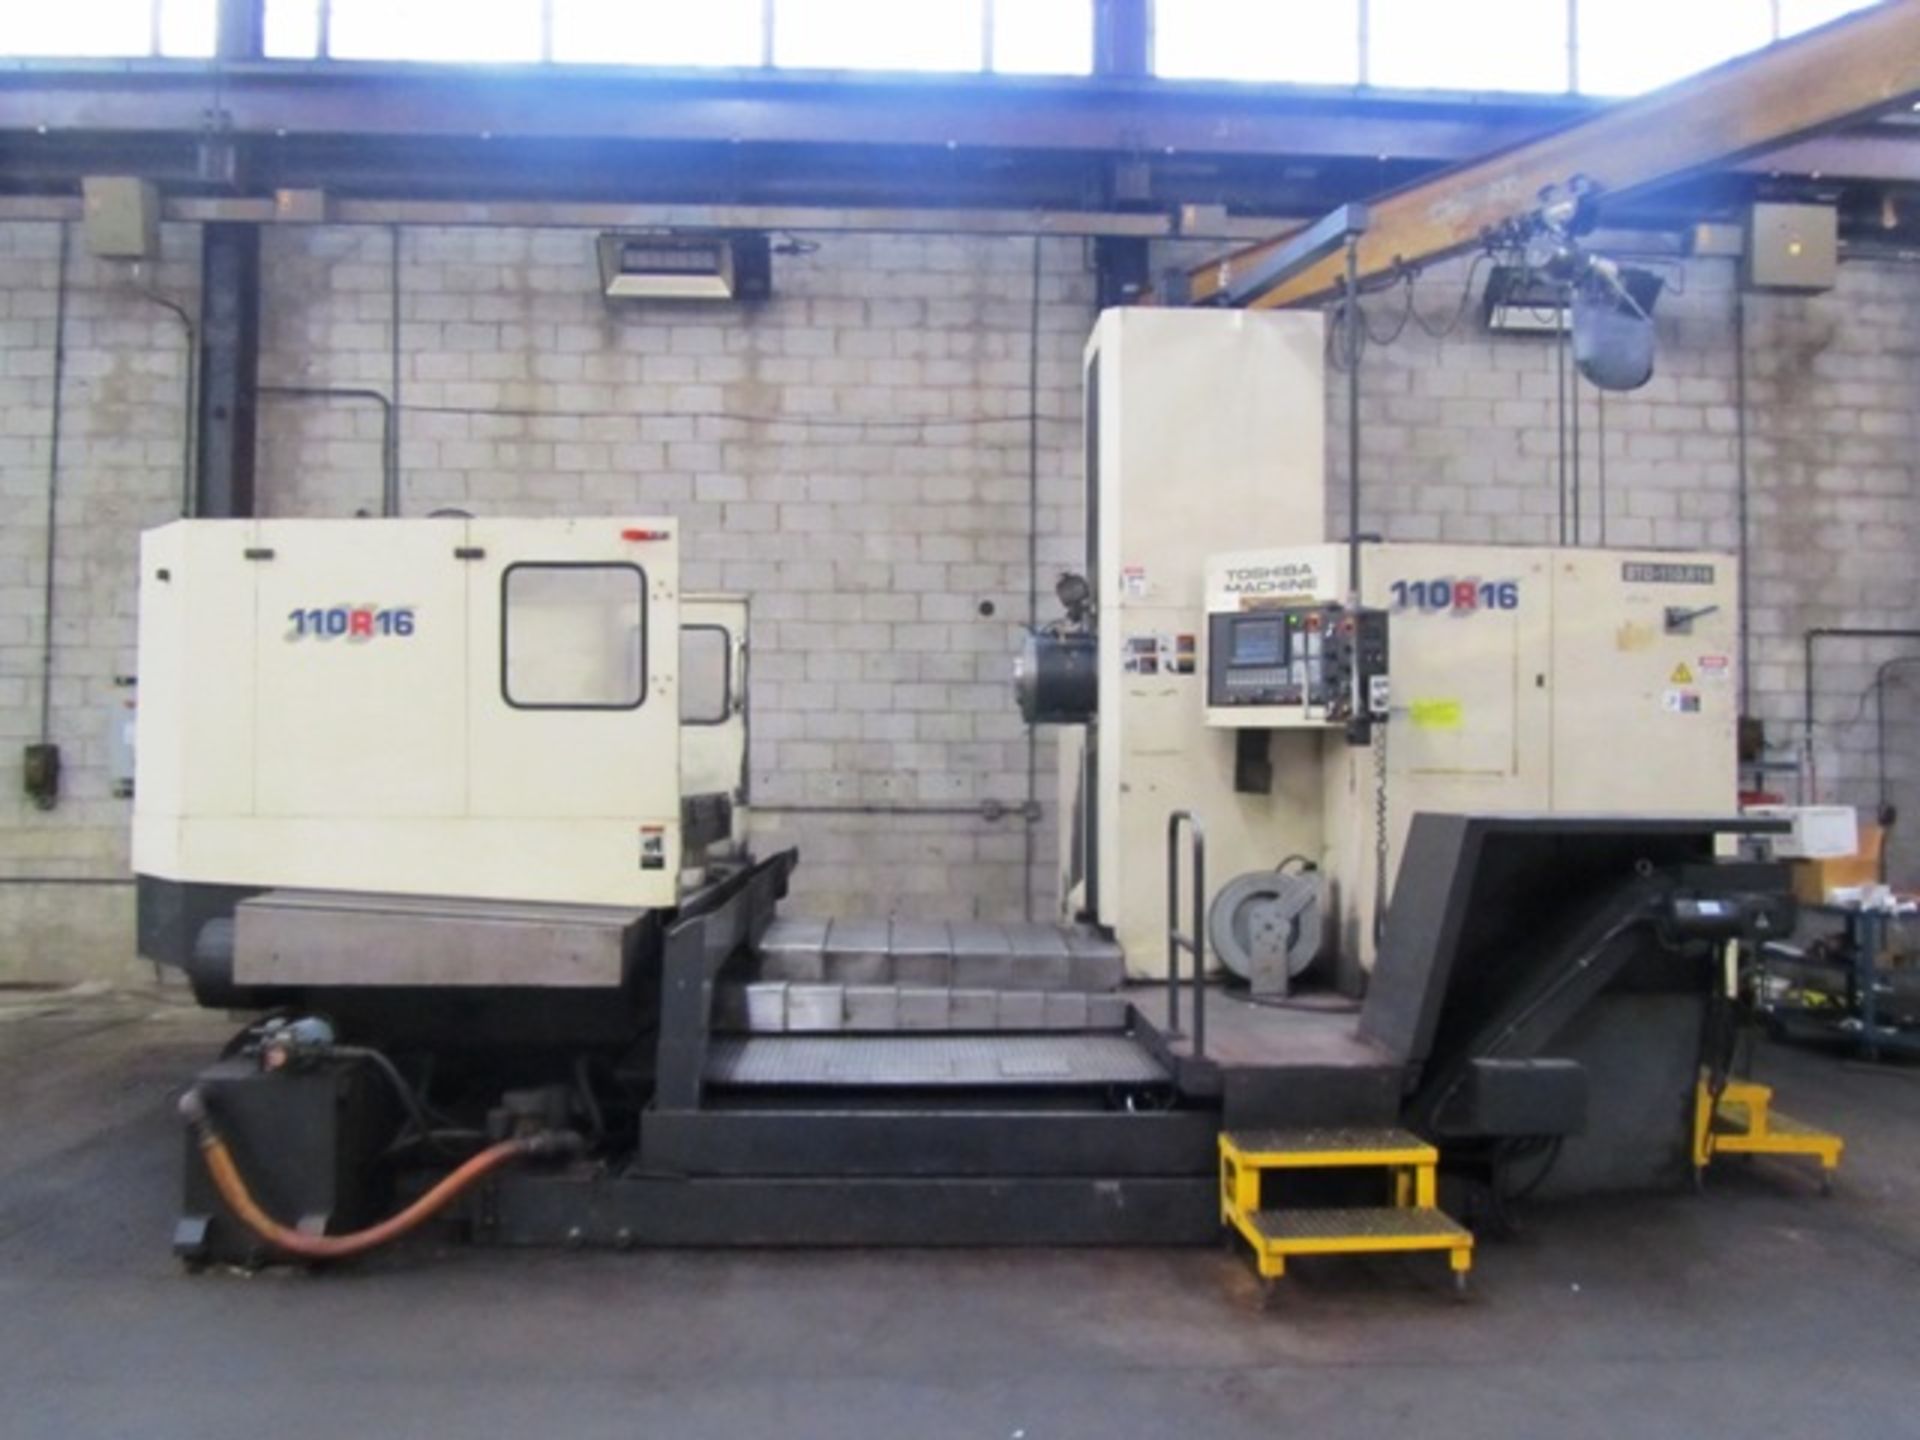 Toshiba BTD-110.R16 4.33'' CNC Table Type Horizontal Boring Mill with 38-ATC, 78.74'' X-Axis, 59. - Image 3 of 6